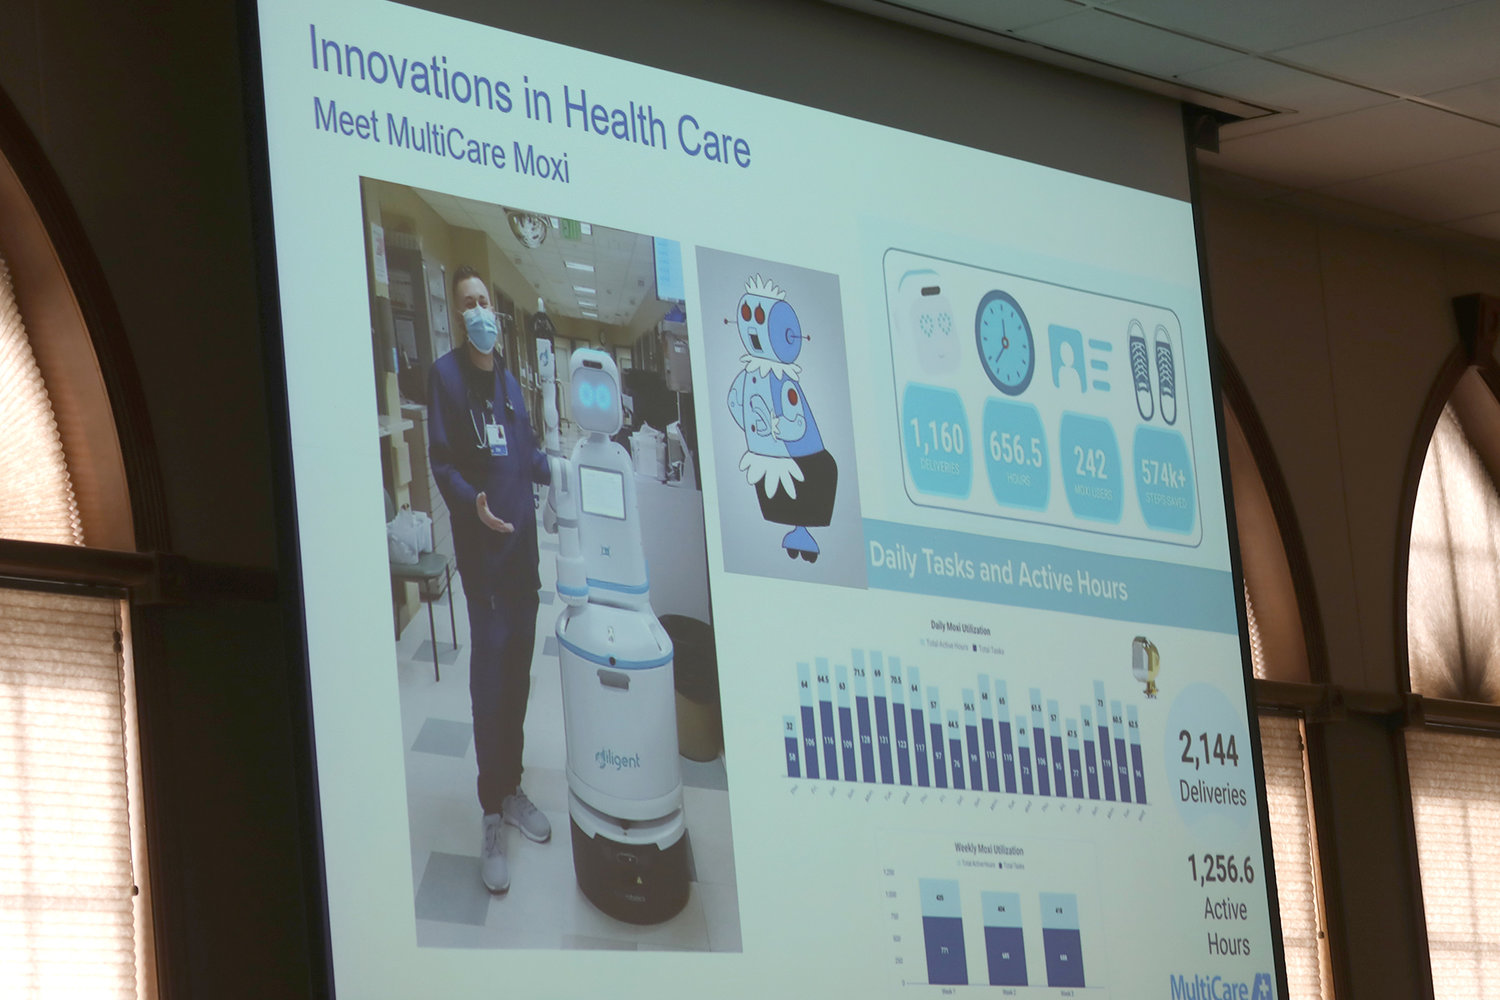 MultiCare's Moxi was introduced at the Thurston County Chamber of Commerce's March 2023 Forum, several months in advance of Moxi's appearance at Capital Medical Center.